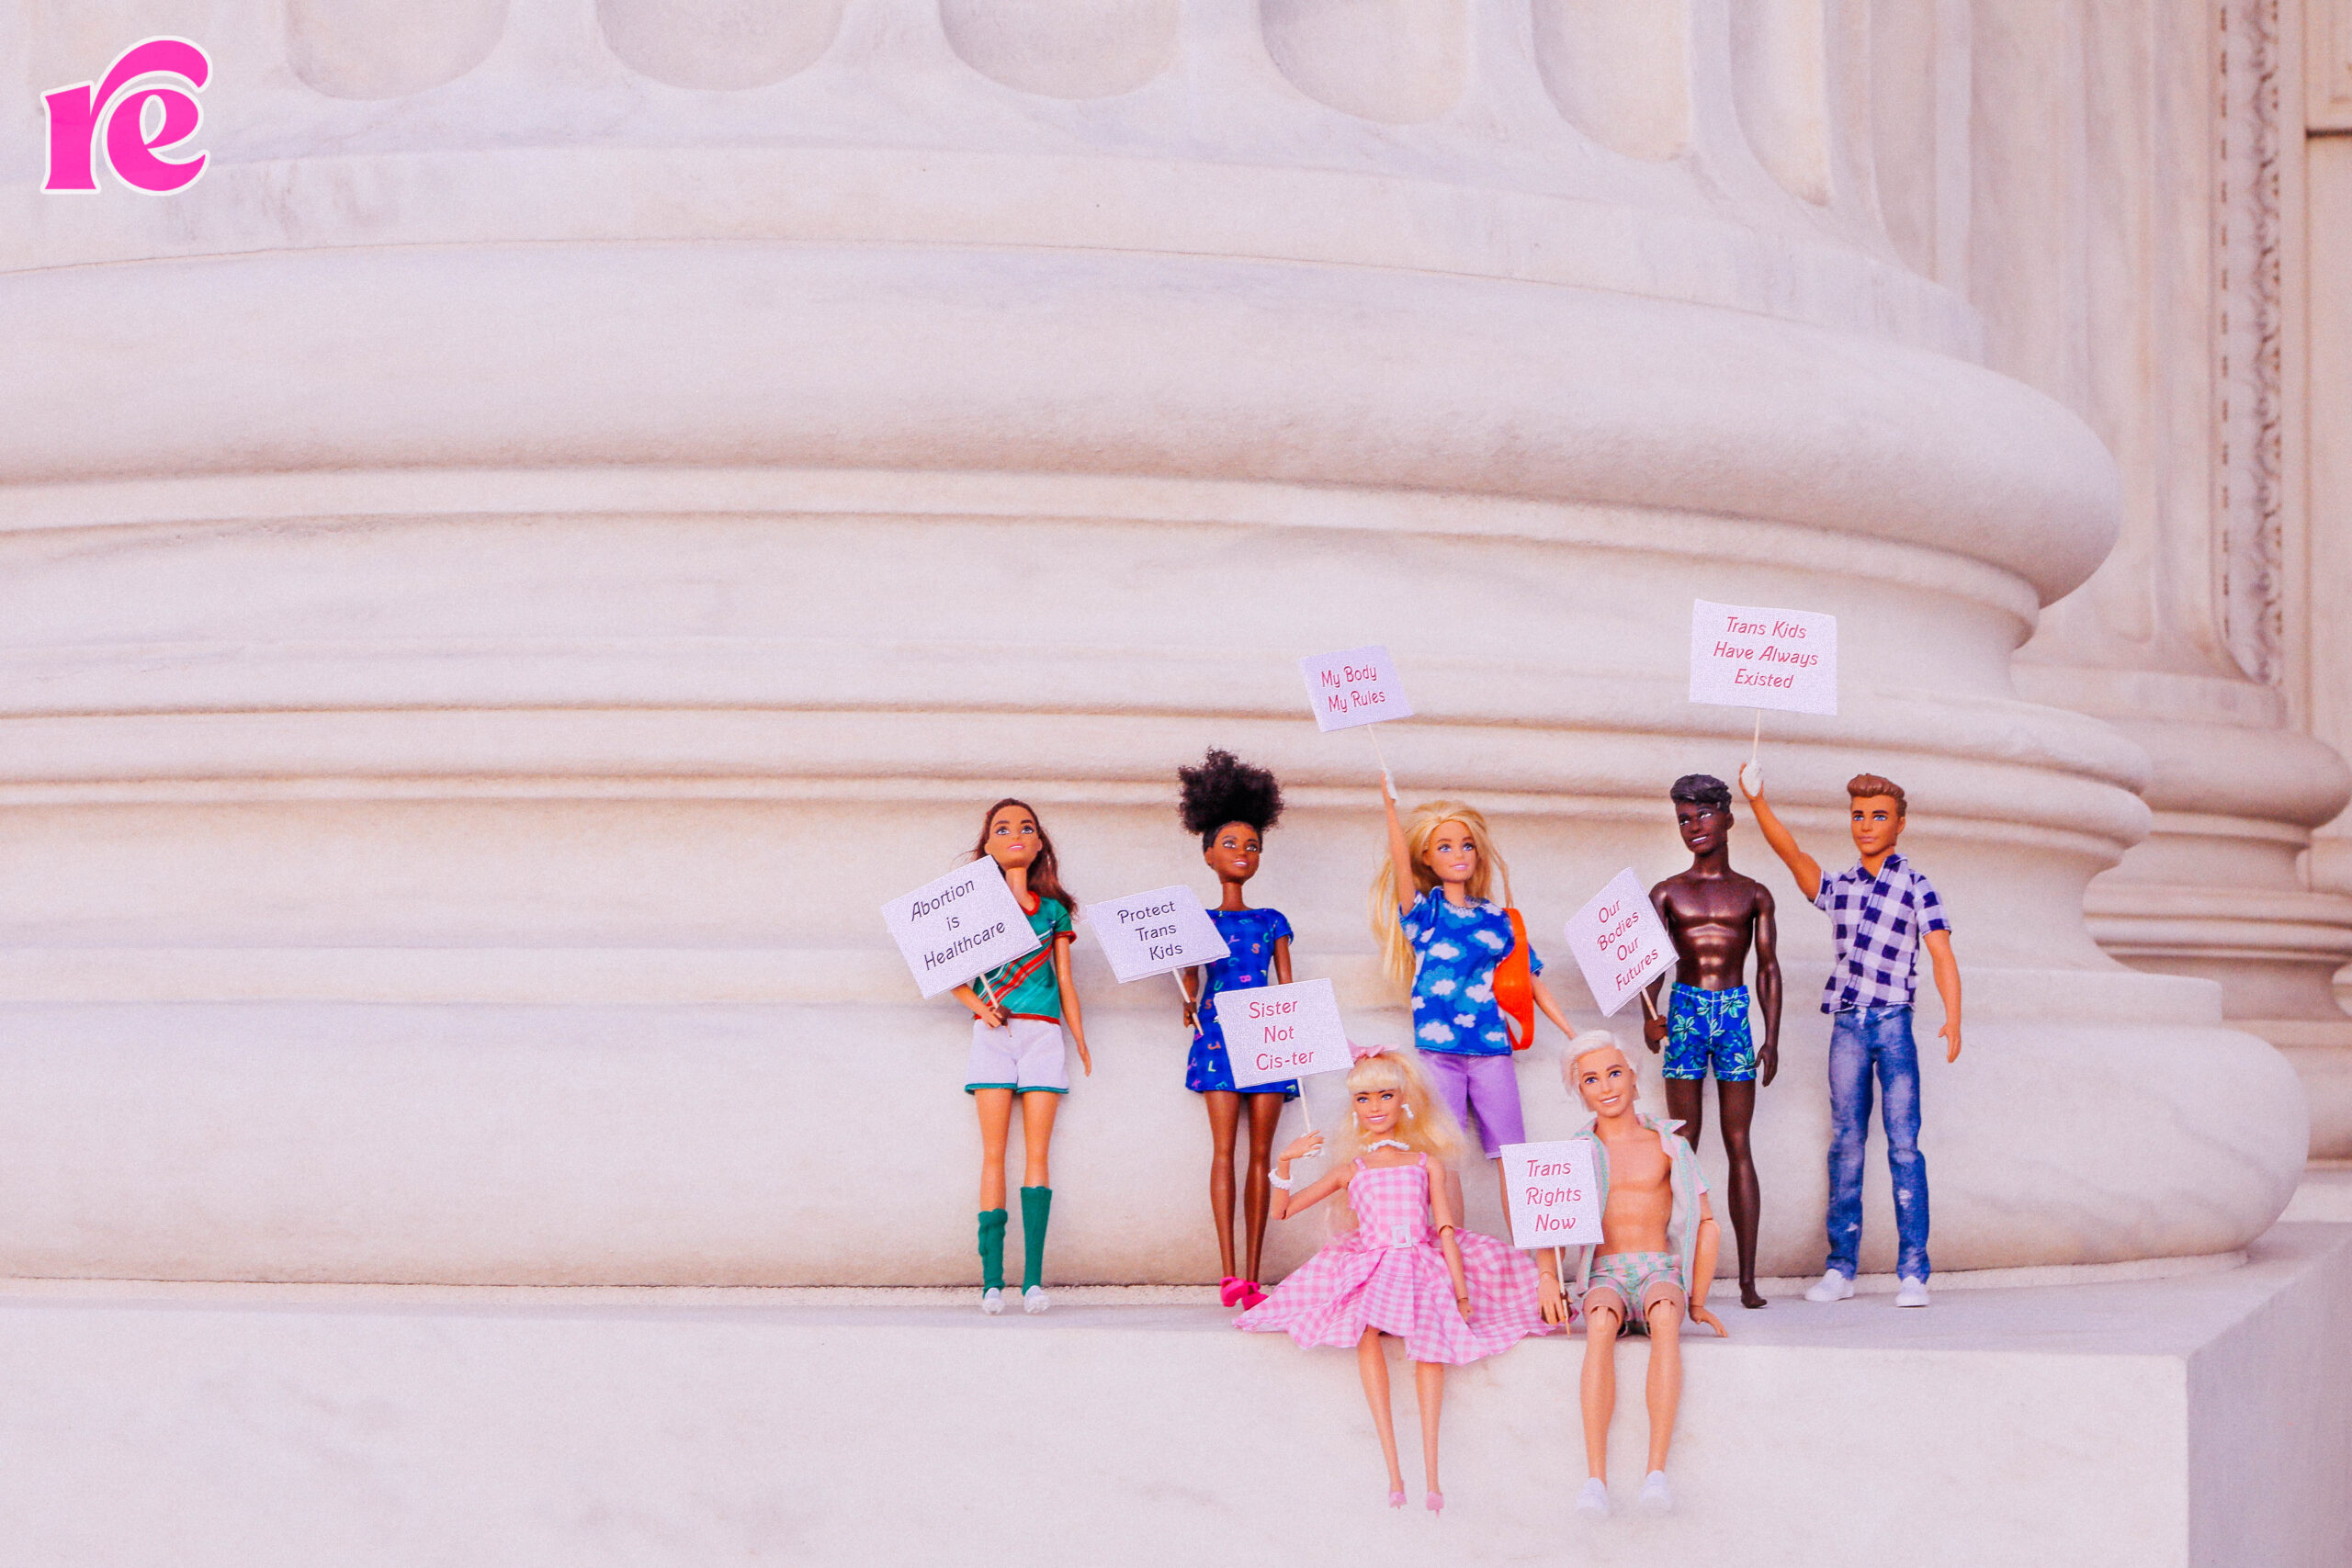 Barbies gathered at the Supreme Court